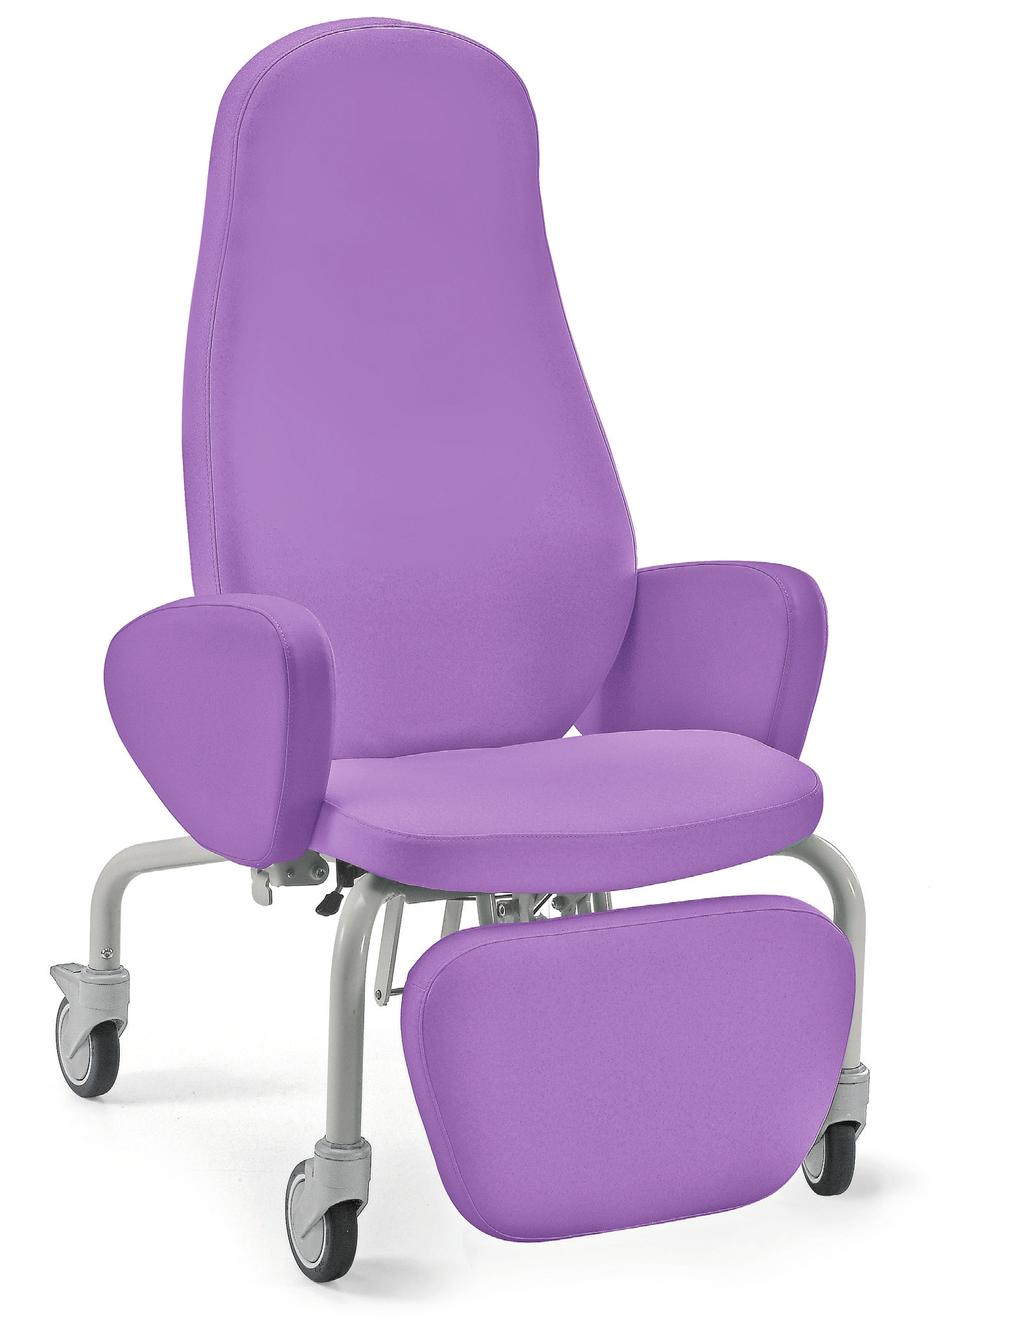 MEDIC Patient Relaxation & Transport Chair 130Kg Designed for patient relaxation and transport, this easy chair has 125mm castors (2 braked castors) and is easily moved using the integral push-pull